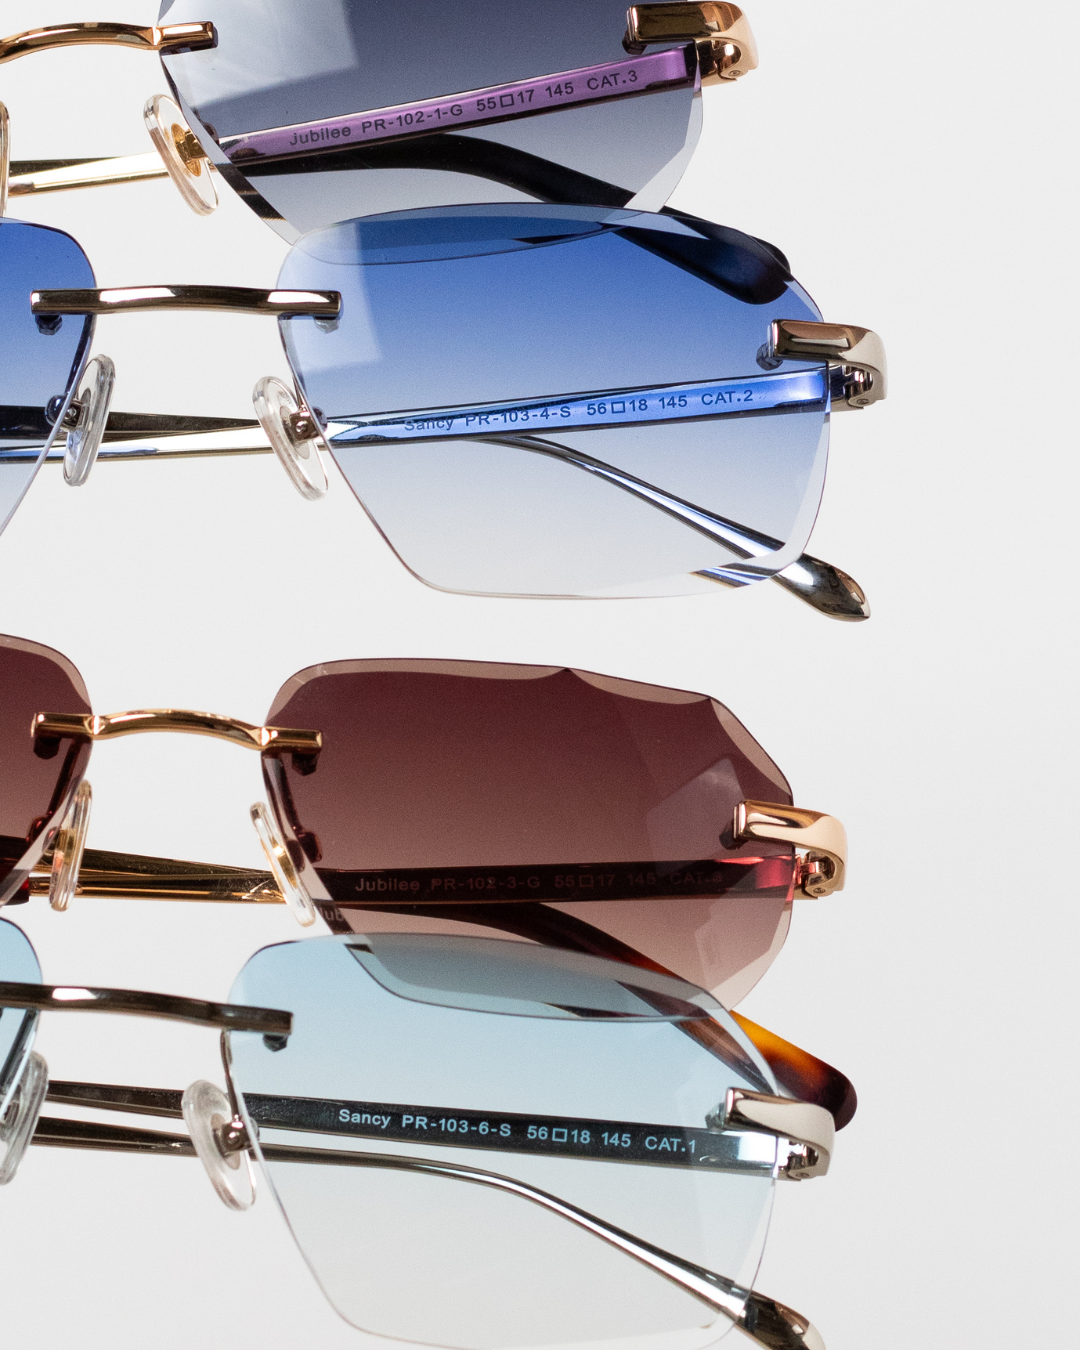 An artistic stack of four luxury sunglasses from different collections, each lens displaying a unique gradient. From top to bottom: 'Jubilee' with gradient grey lenses in 18k gold frames, 'Sancy' in onyx blue with 18k gold, another 'Jubilee' pair in modern brown, and 'Sancy' with sky blue lenses in sterling silver frames, all with a signature diamond cut. The reflective quality of the lenses shines against the white backdrop, showcasing the brand's diverse yet consistently elegant style.